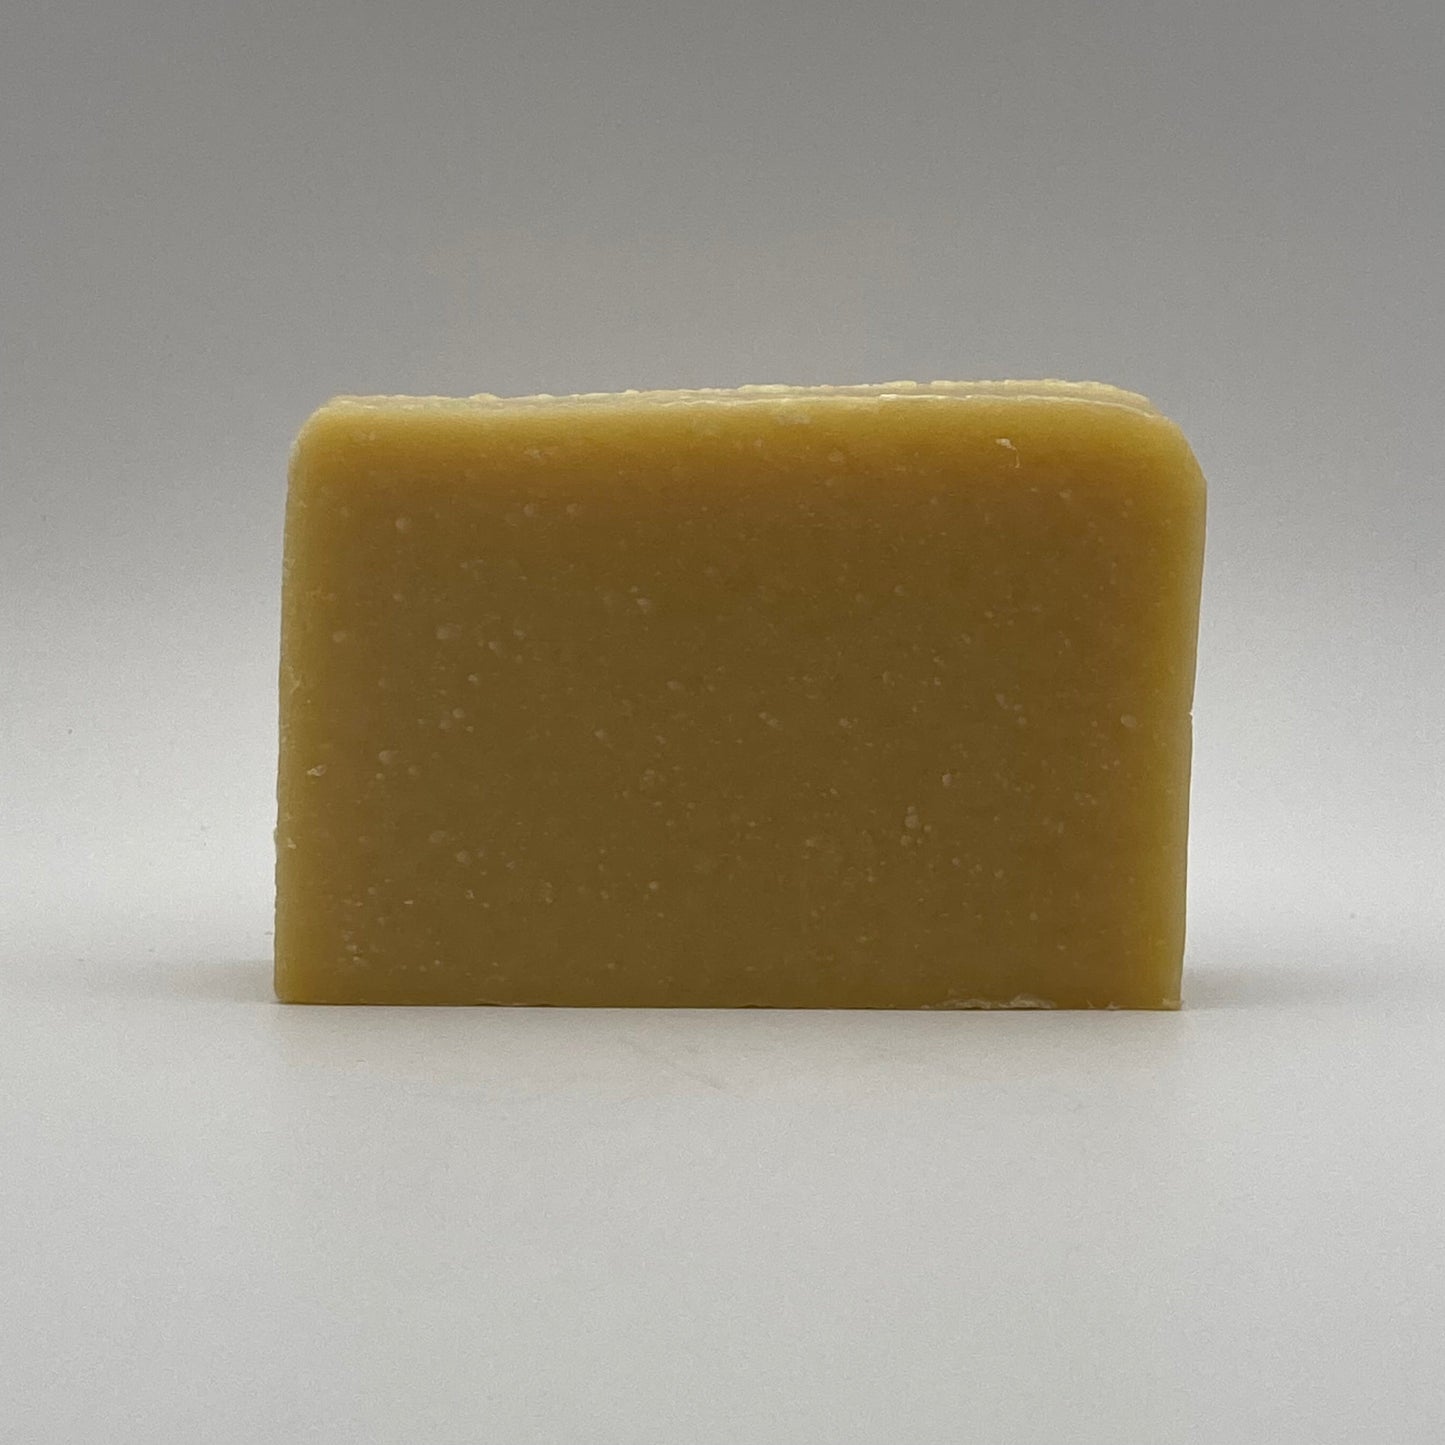 The Unscented Goat Milk Soap Bar